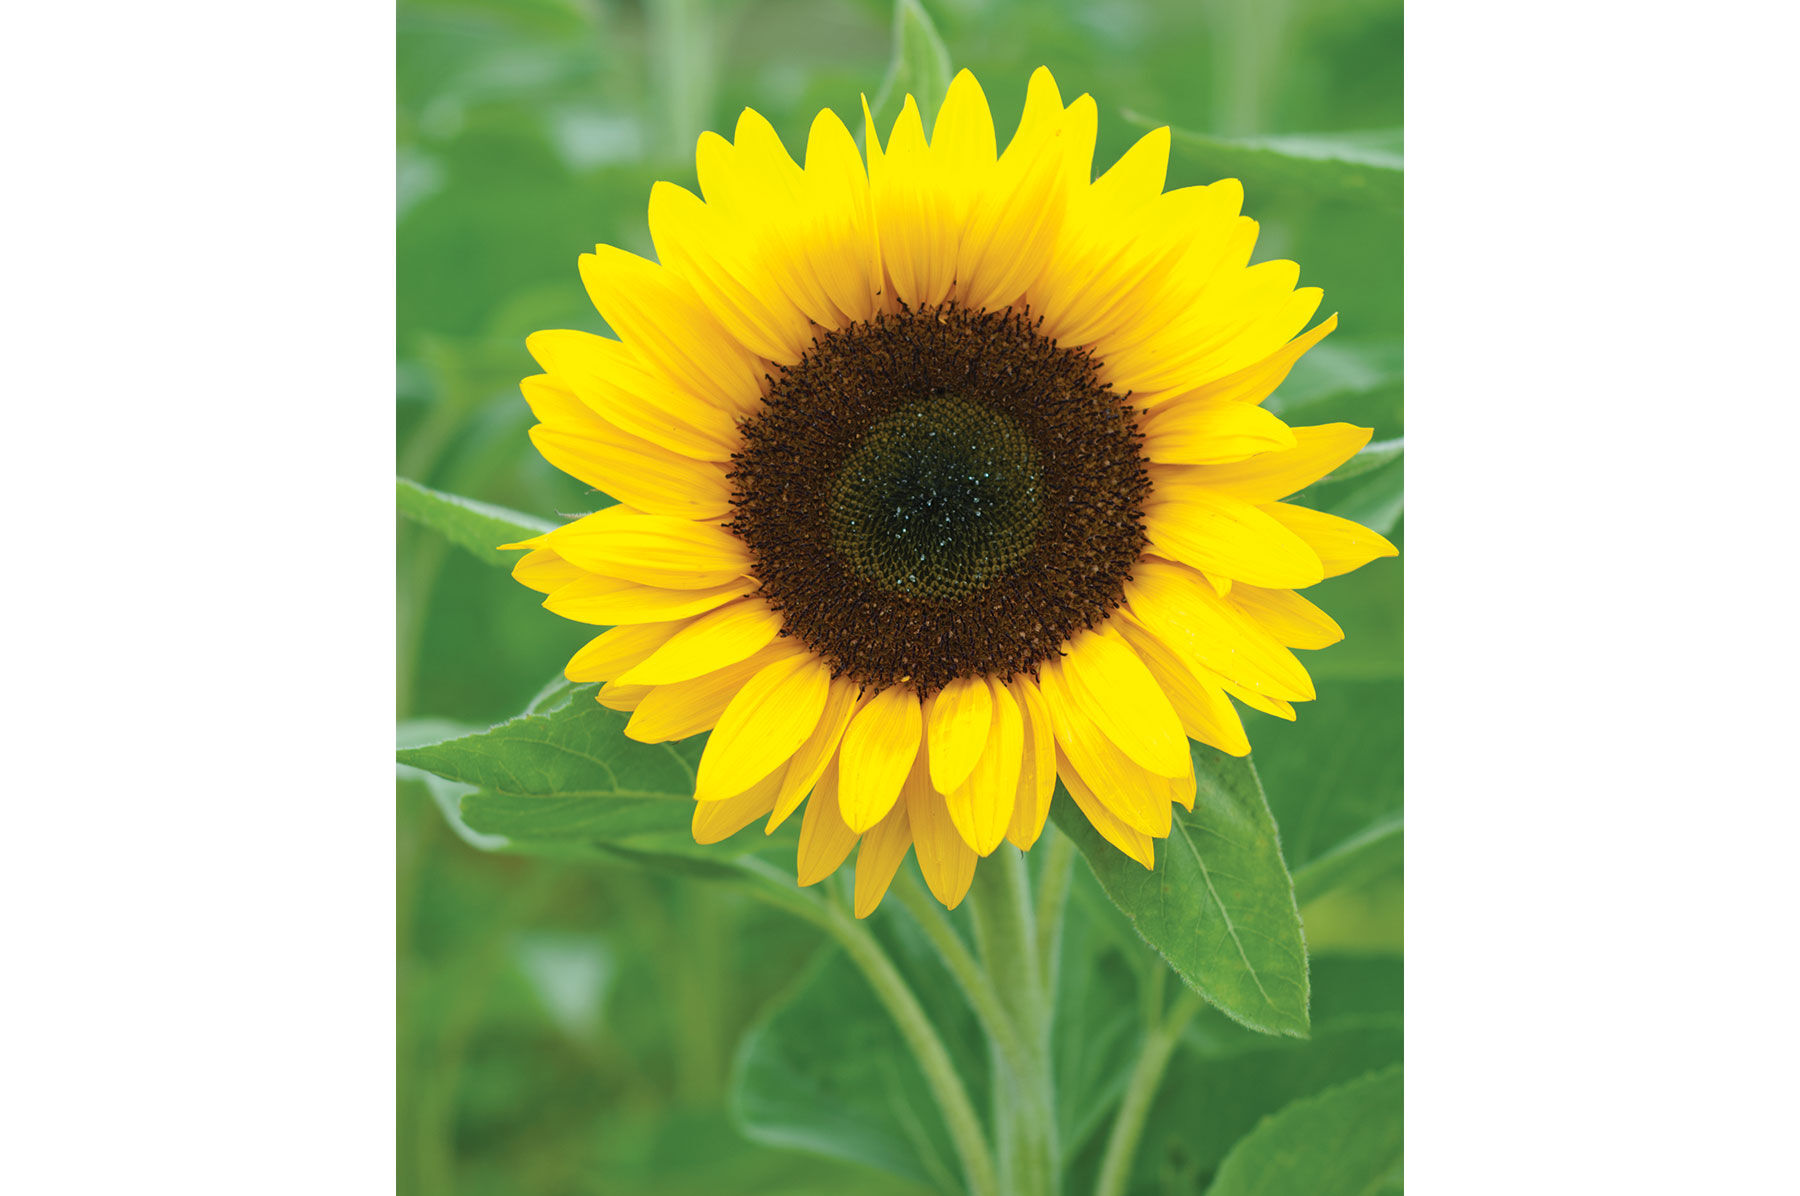 What month do sunflowers grow?